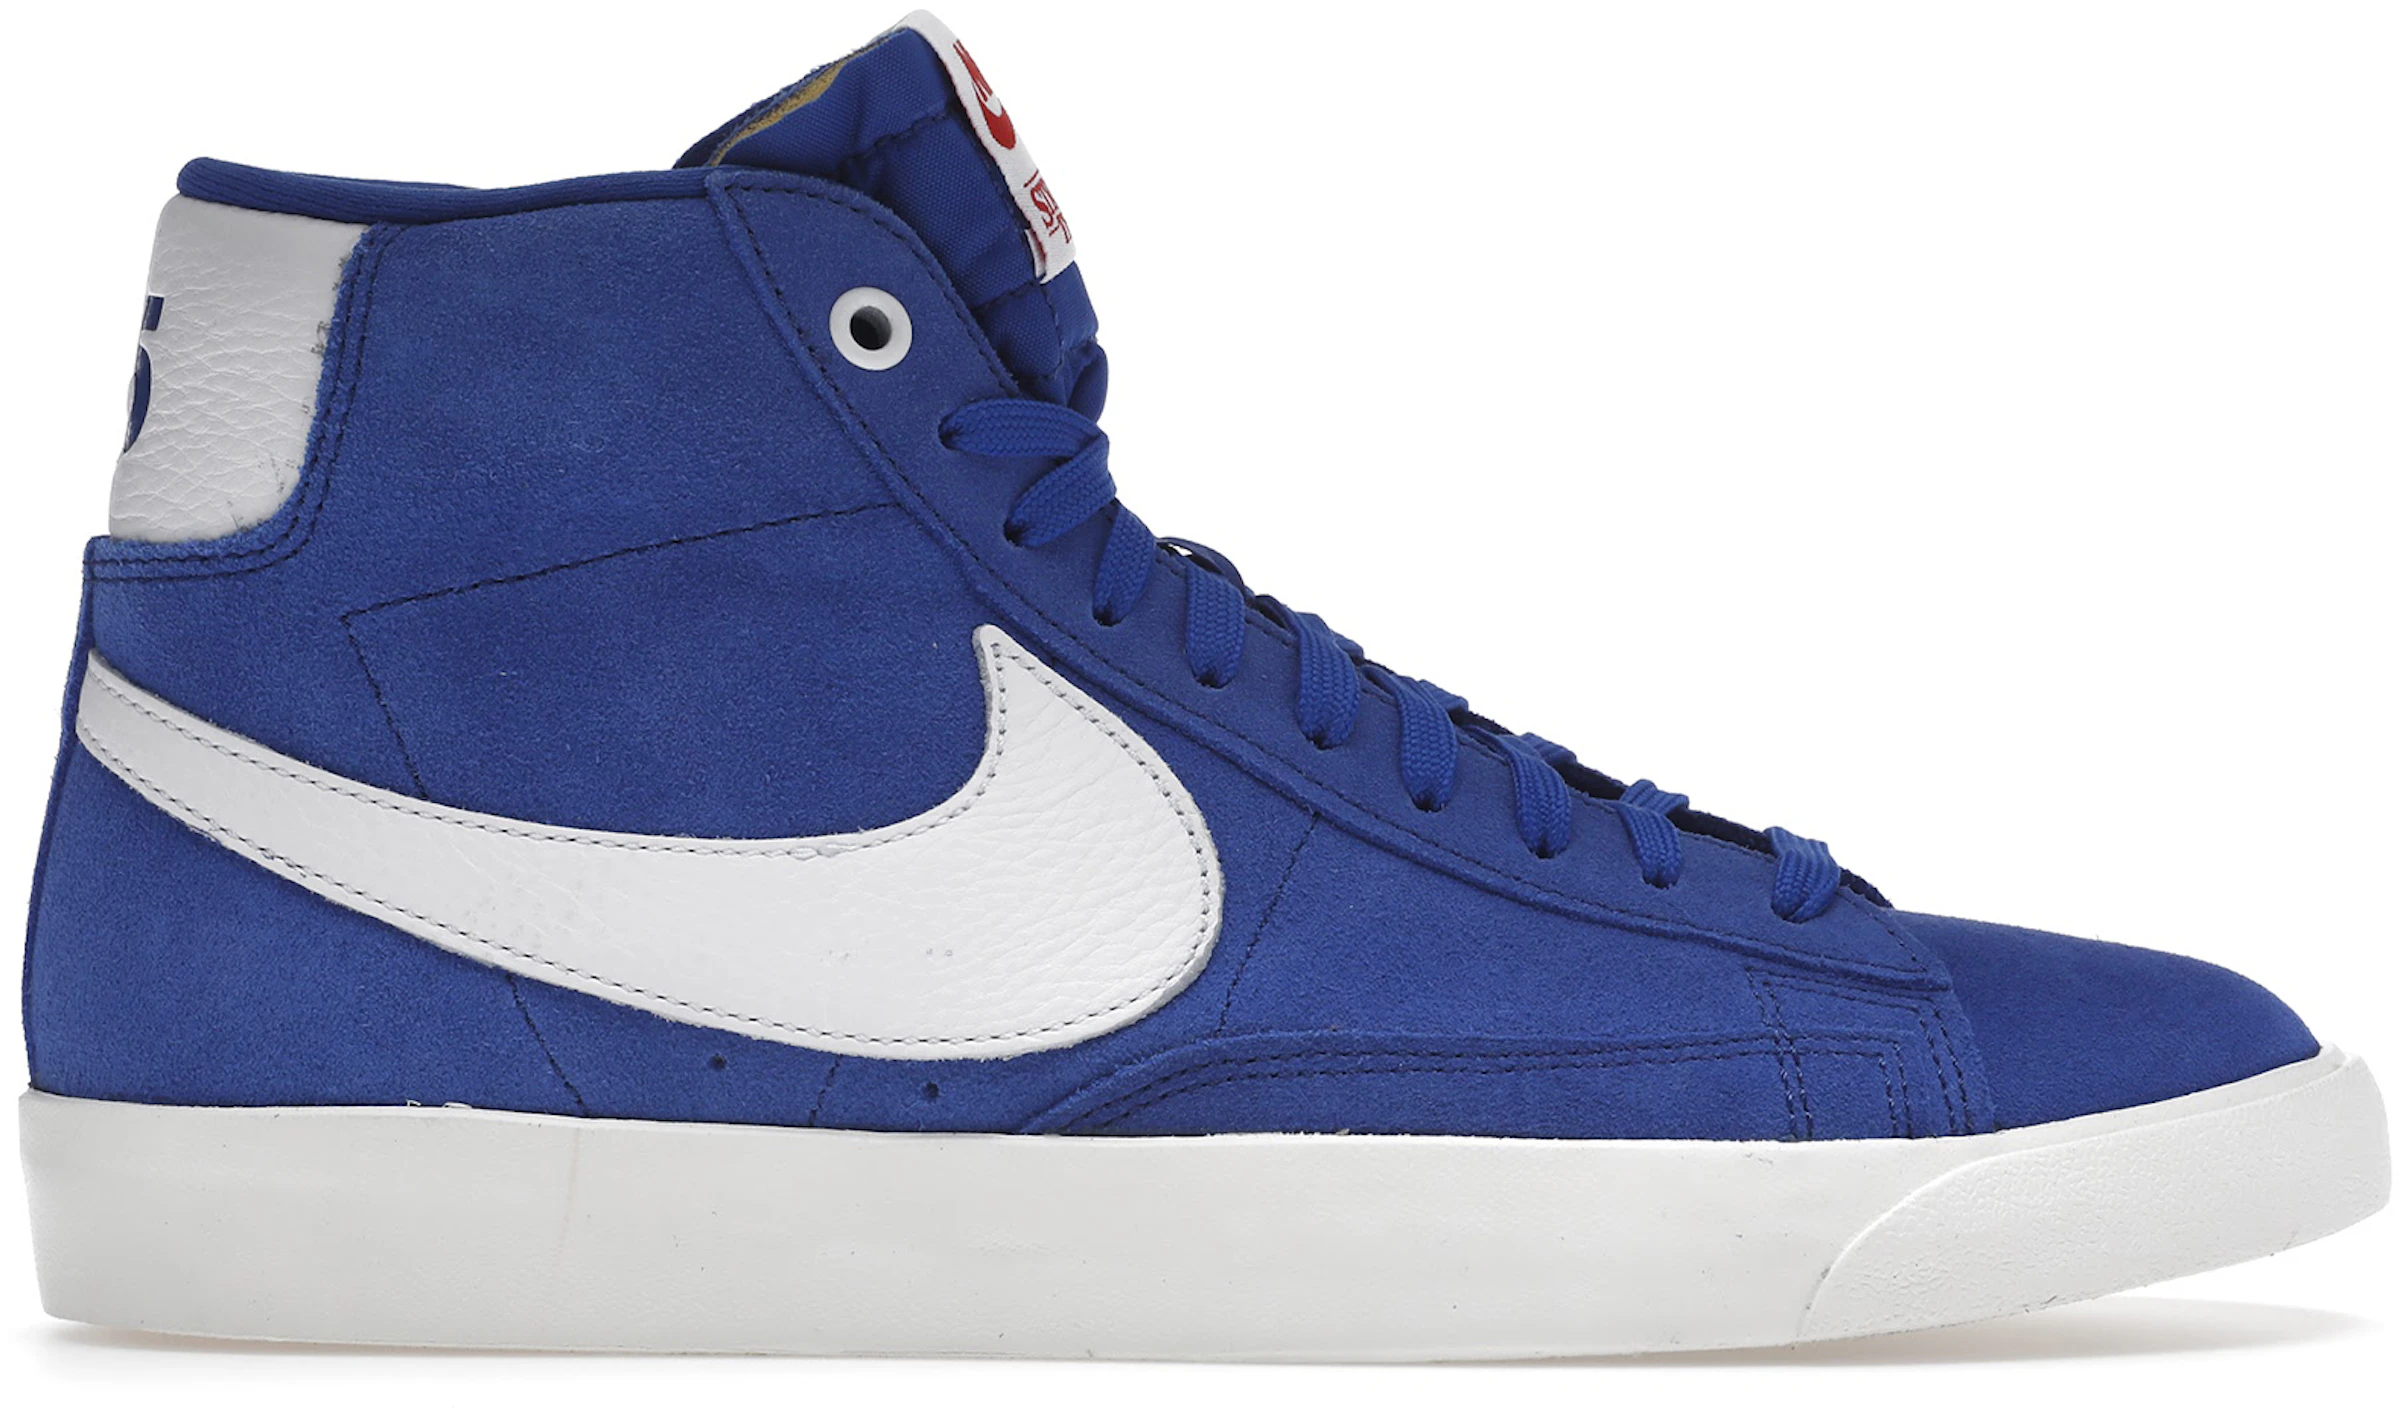 Acostumbrar Restricciones comedia Nike Blazer Mid Stranger Things Independence Day Pack - CK1906-400 - MX